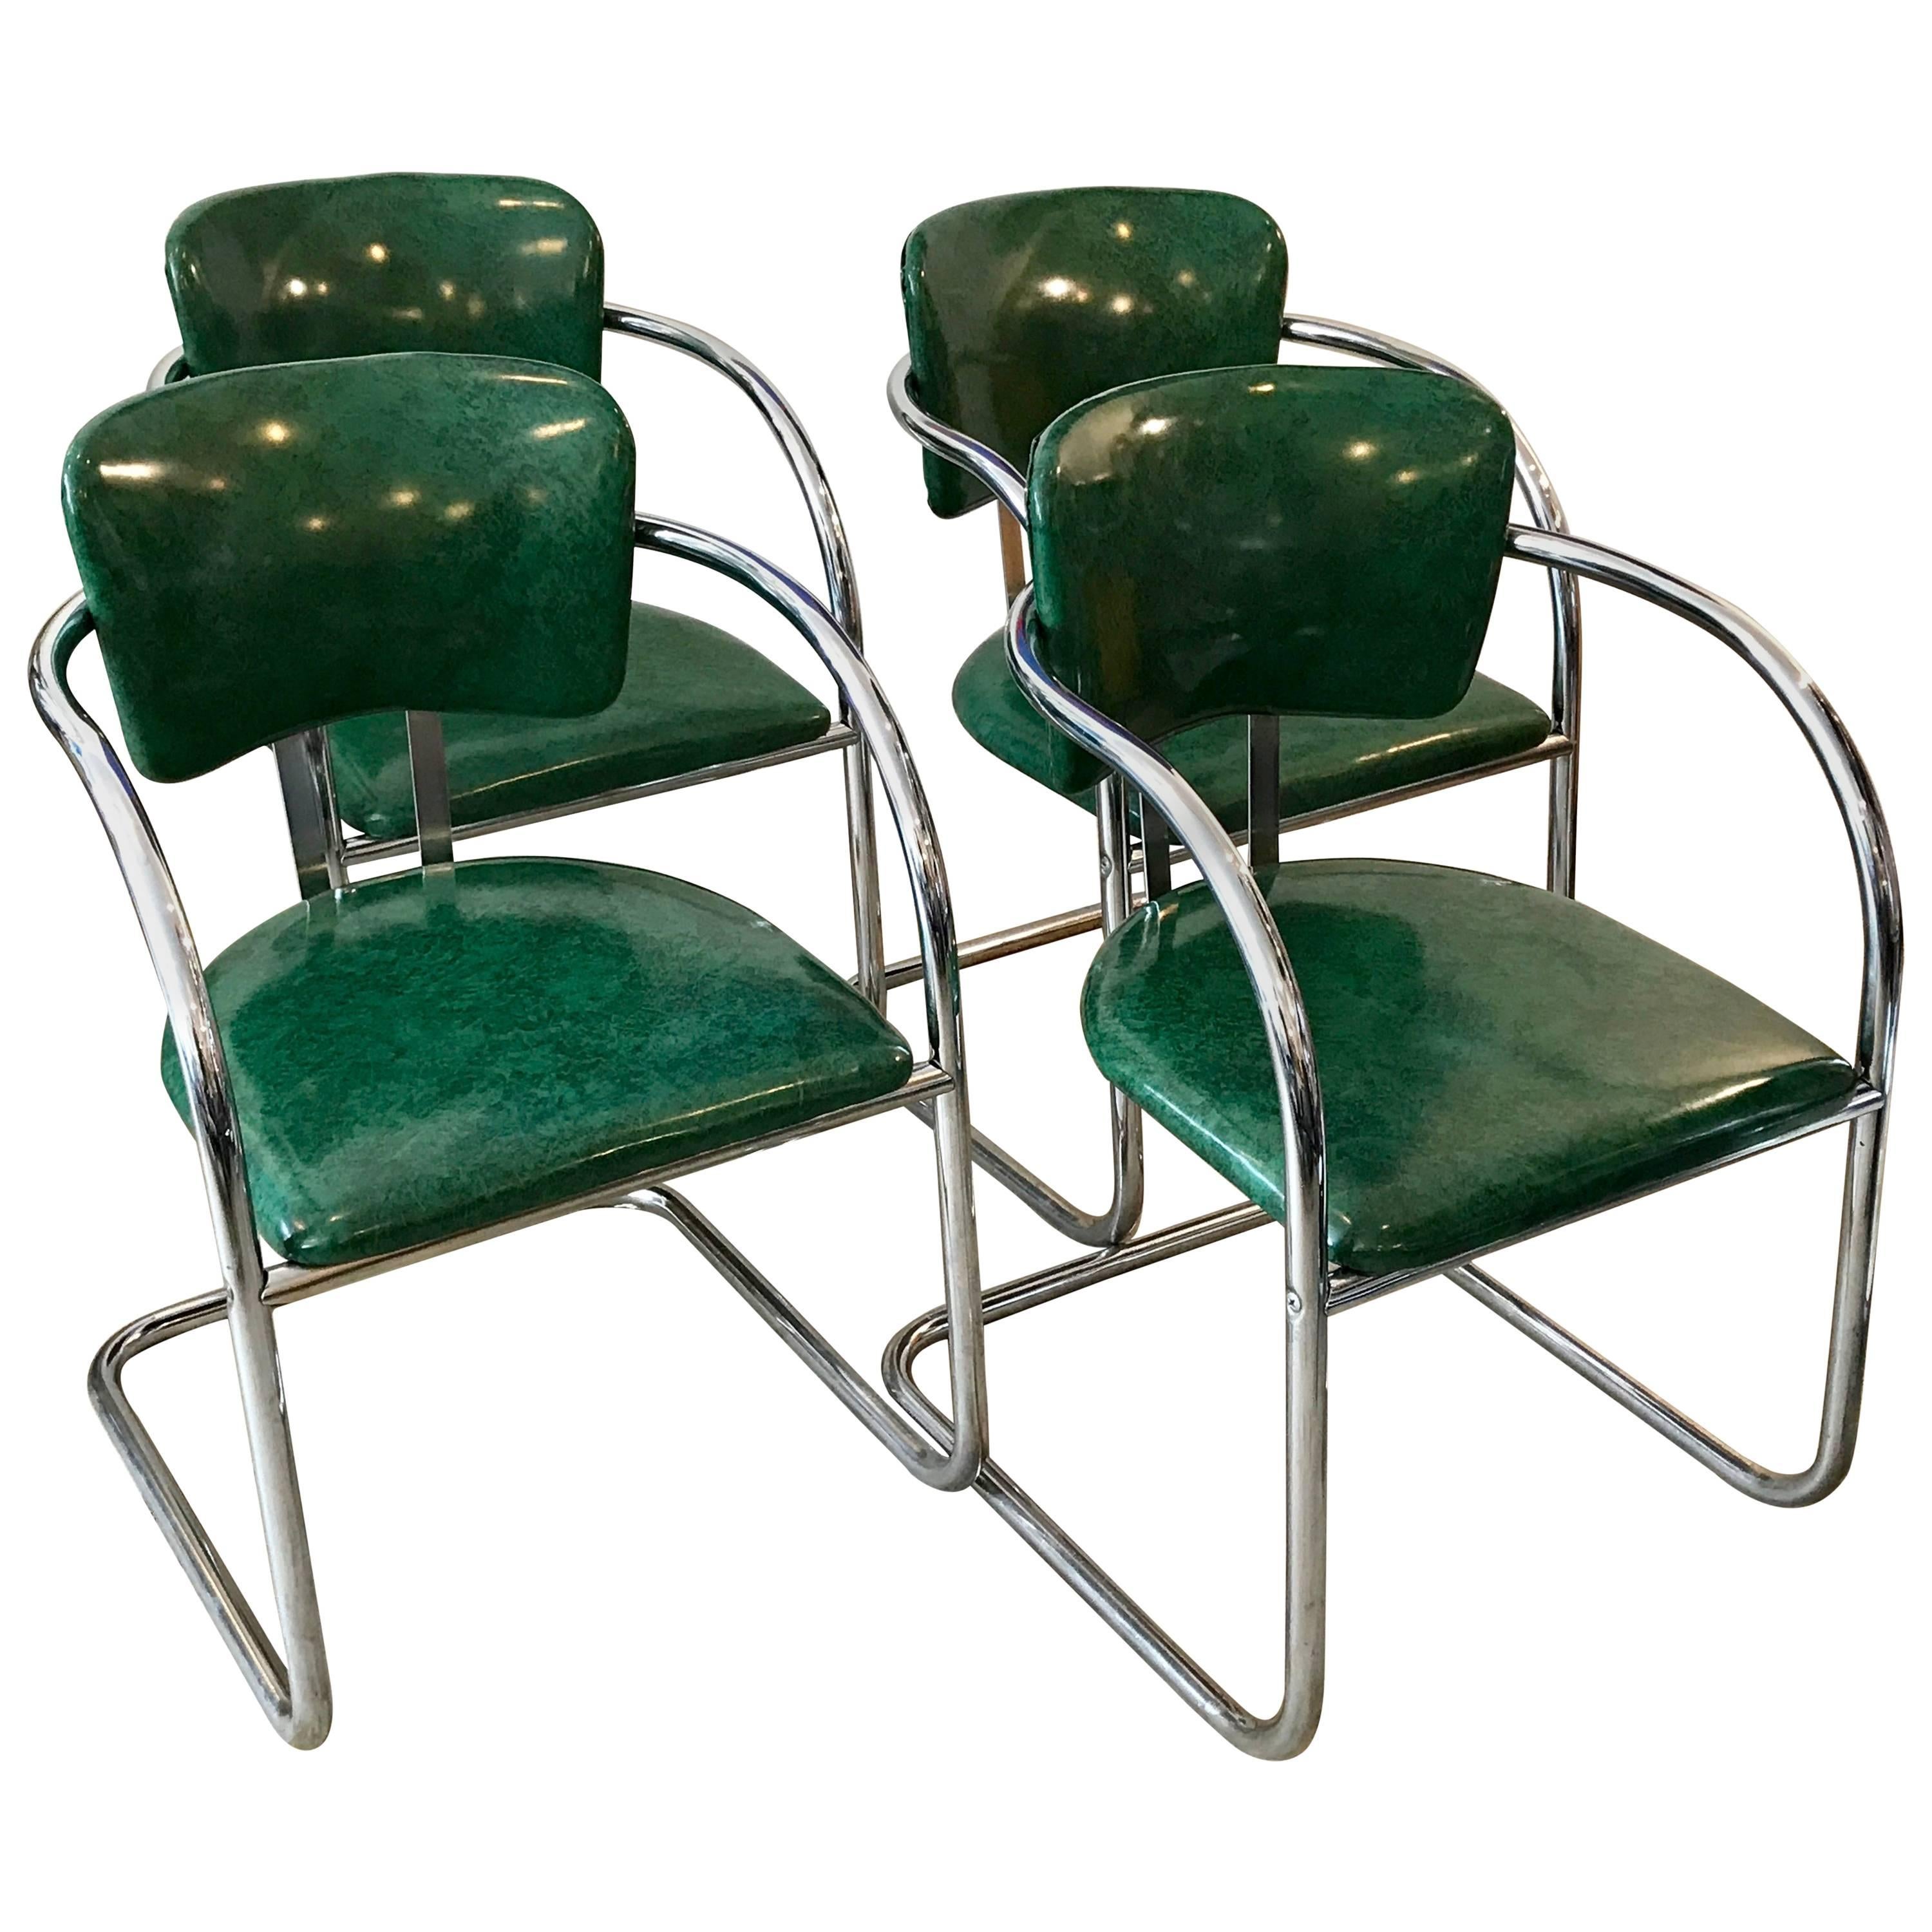 Four Chrome Streamline Modern Dining Chairs in the Style of KEM Weber, 1930's